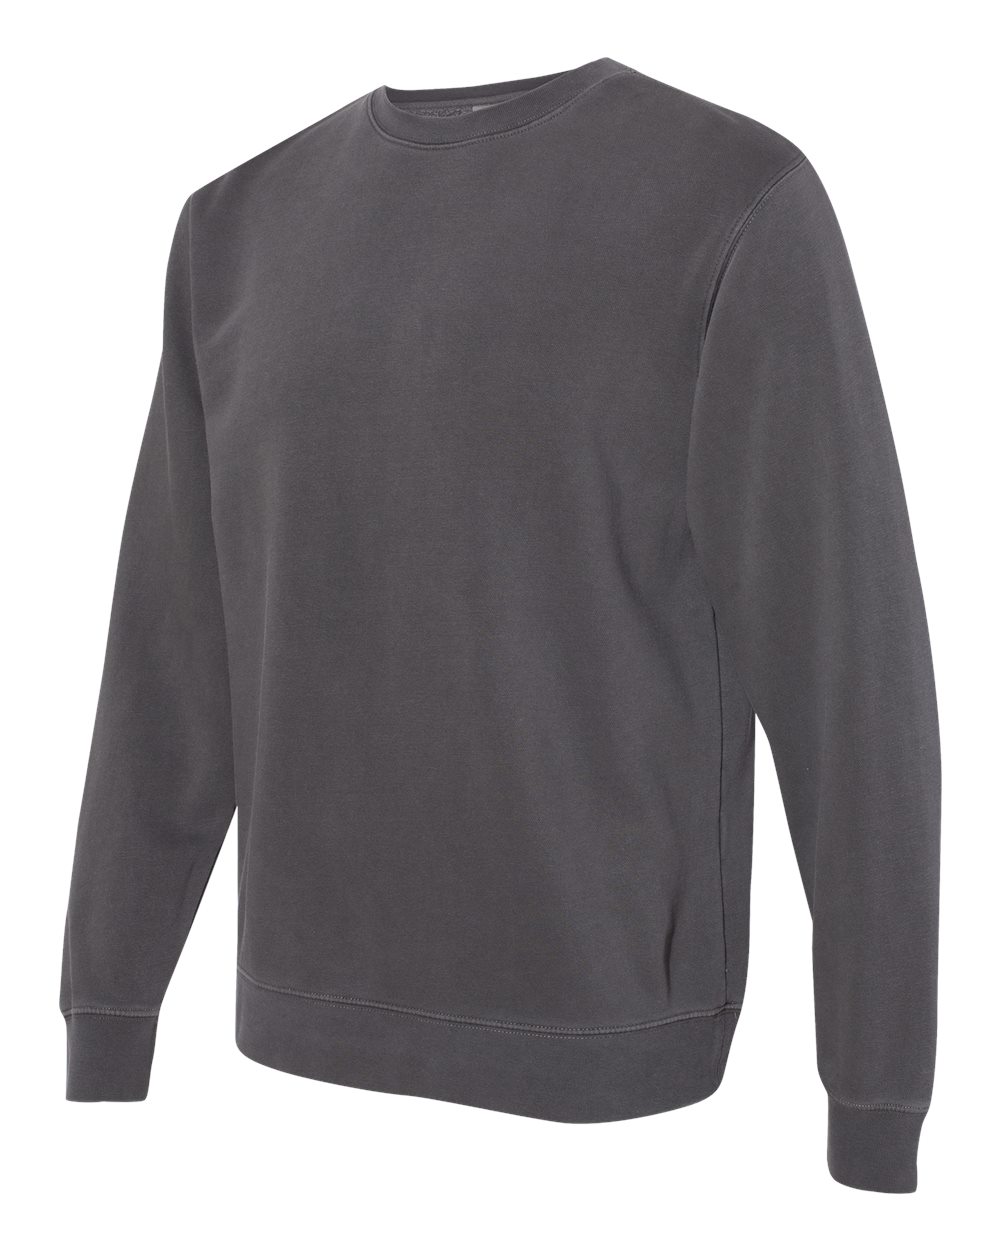 Independent Trading Co. PRM3500 | Midweight Pigment-Dyed Crewneck ...